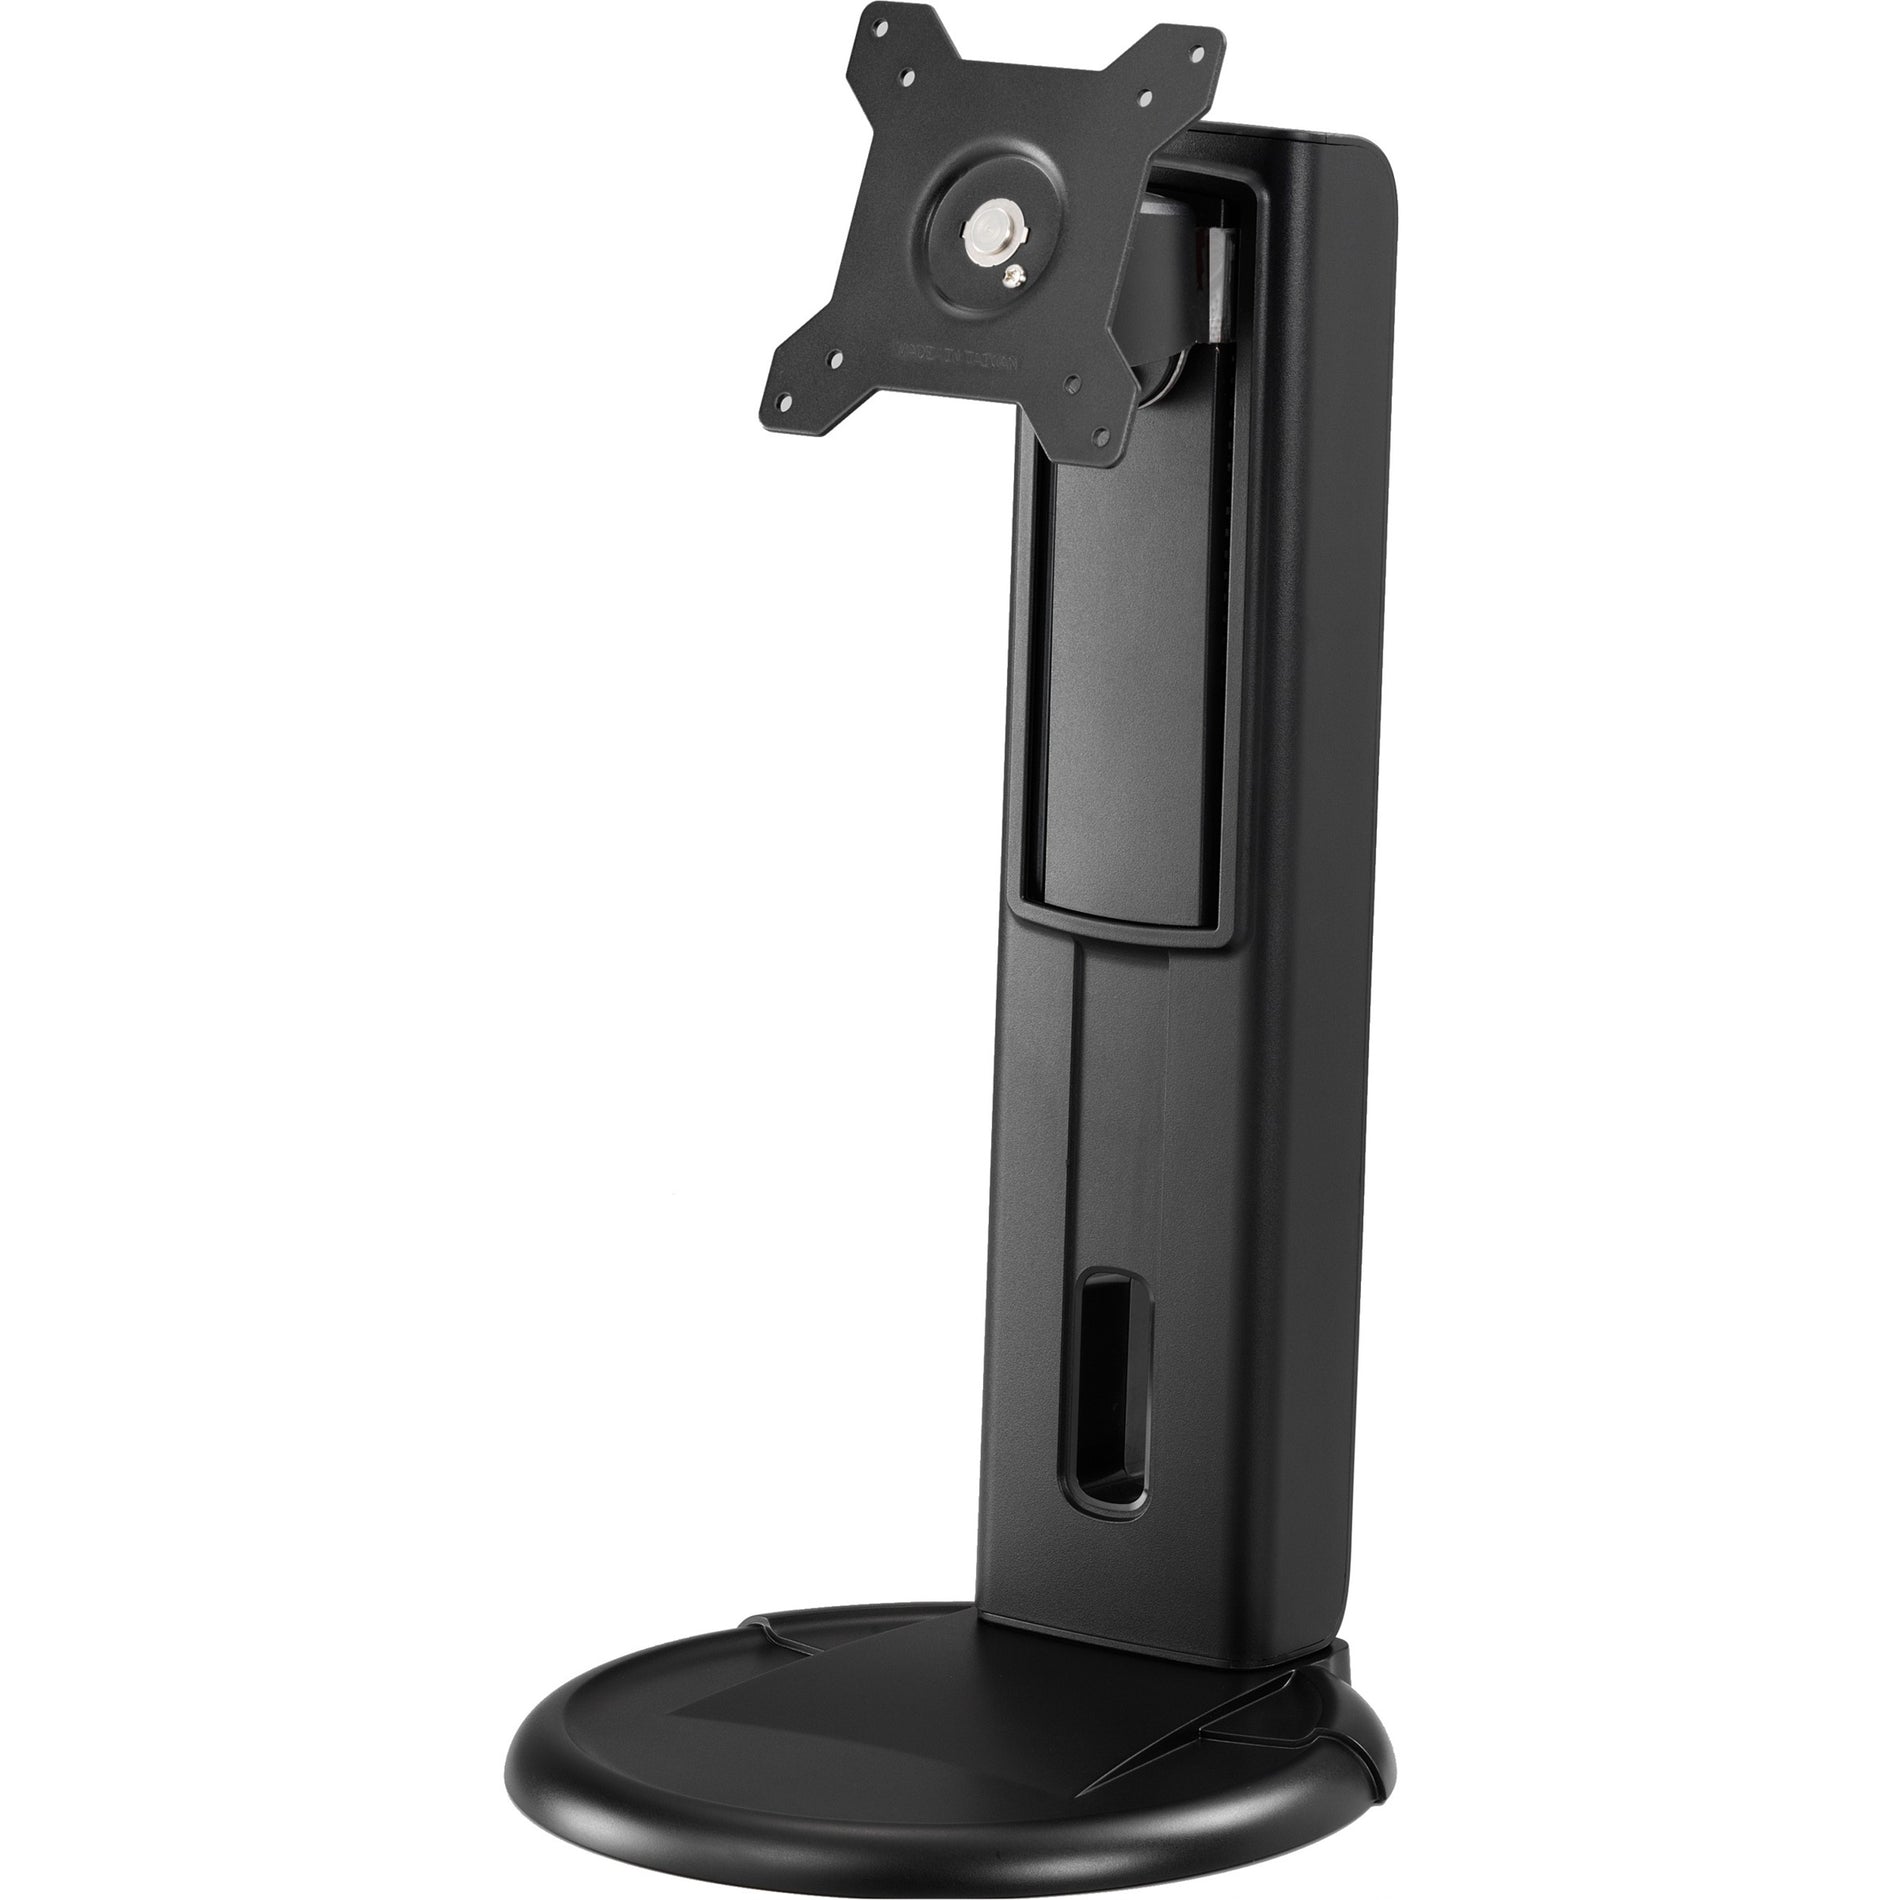 Amer Mounts AMR1S LCD/LED Monitor Stand, Height Adjustable, Supports up to 24", 17.6lbs and VESA, Easy Install, Smart Torque Adjust, 360 Degree Rotation, Smart Cable Management